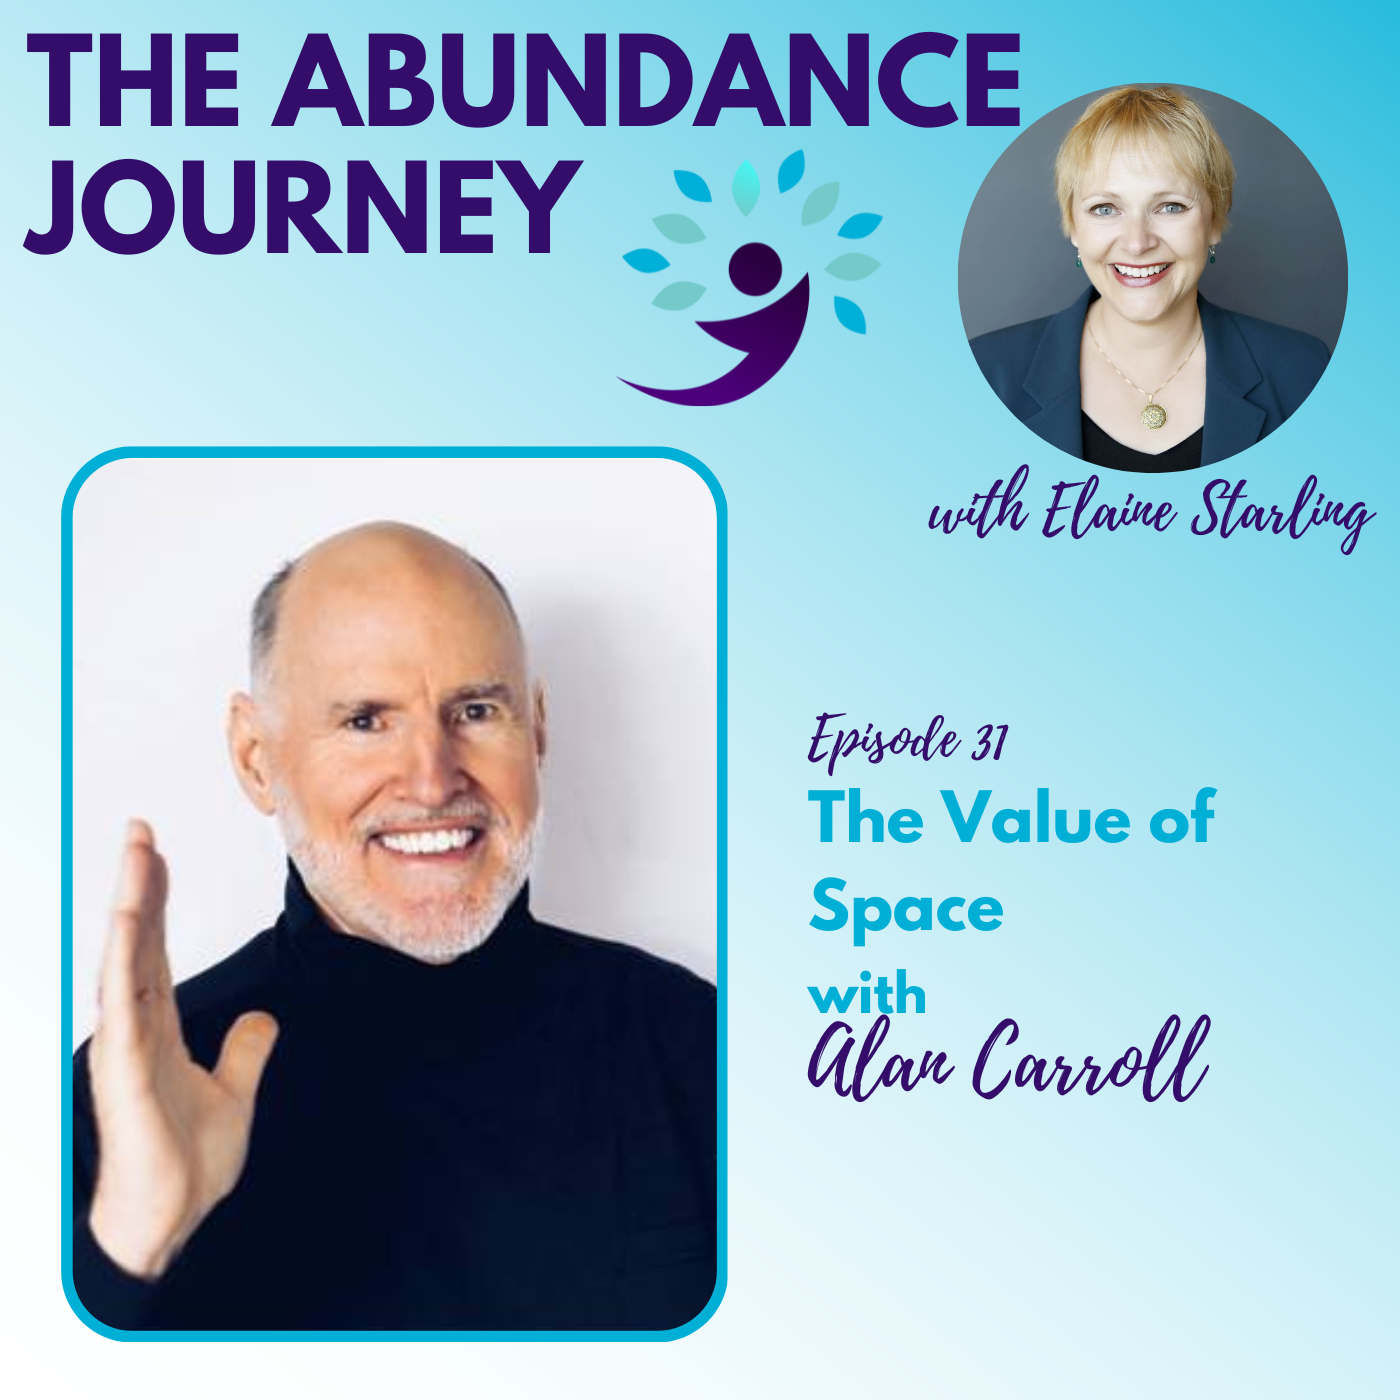 The Value of Space - Alan Carroll